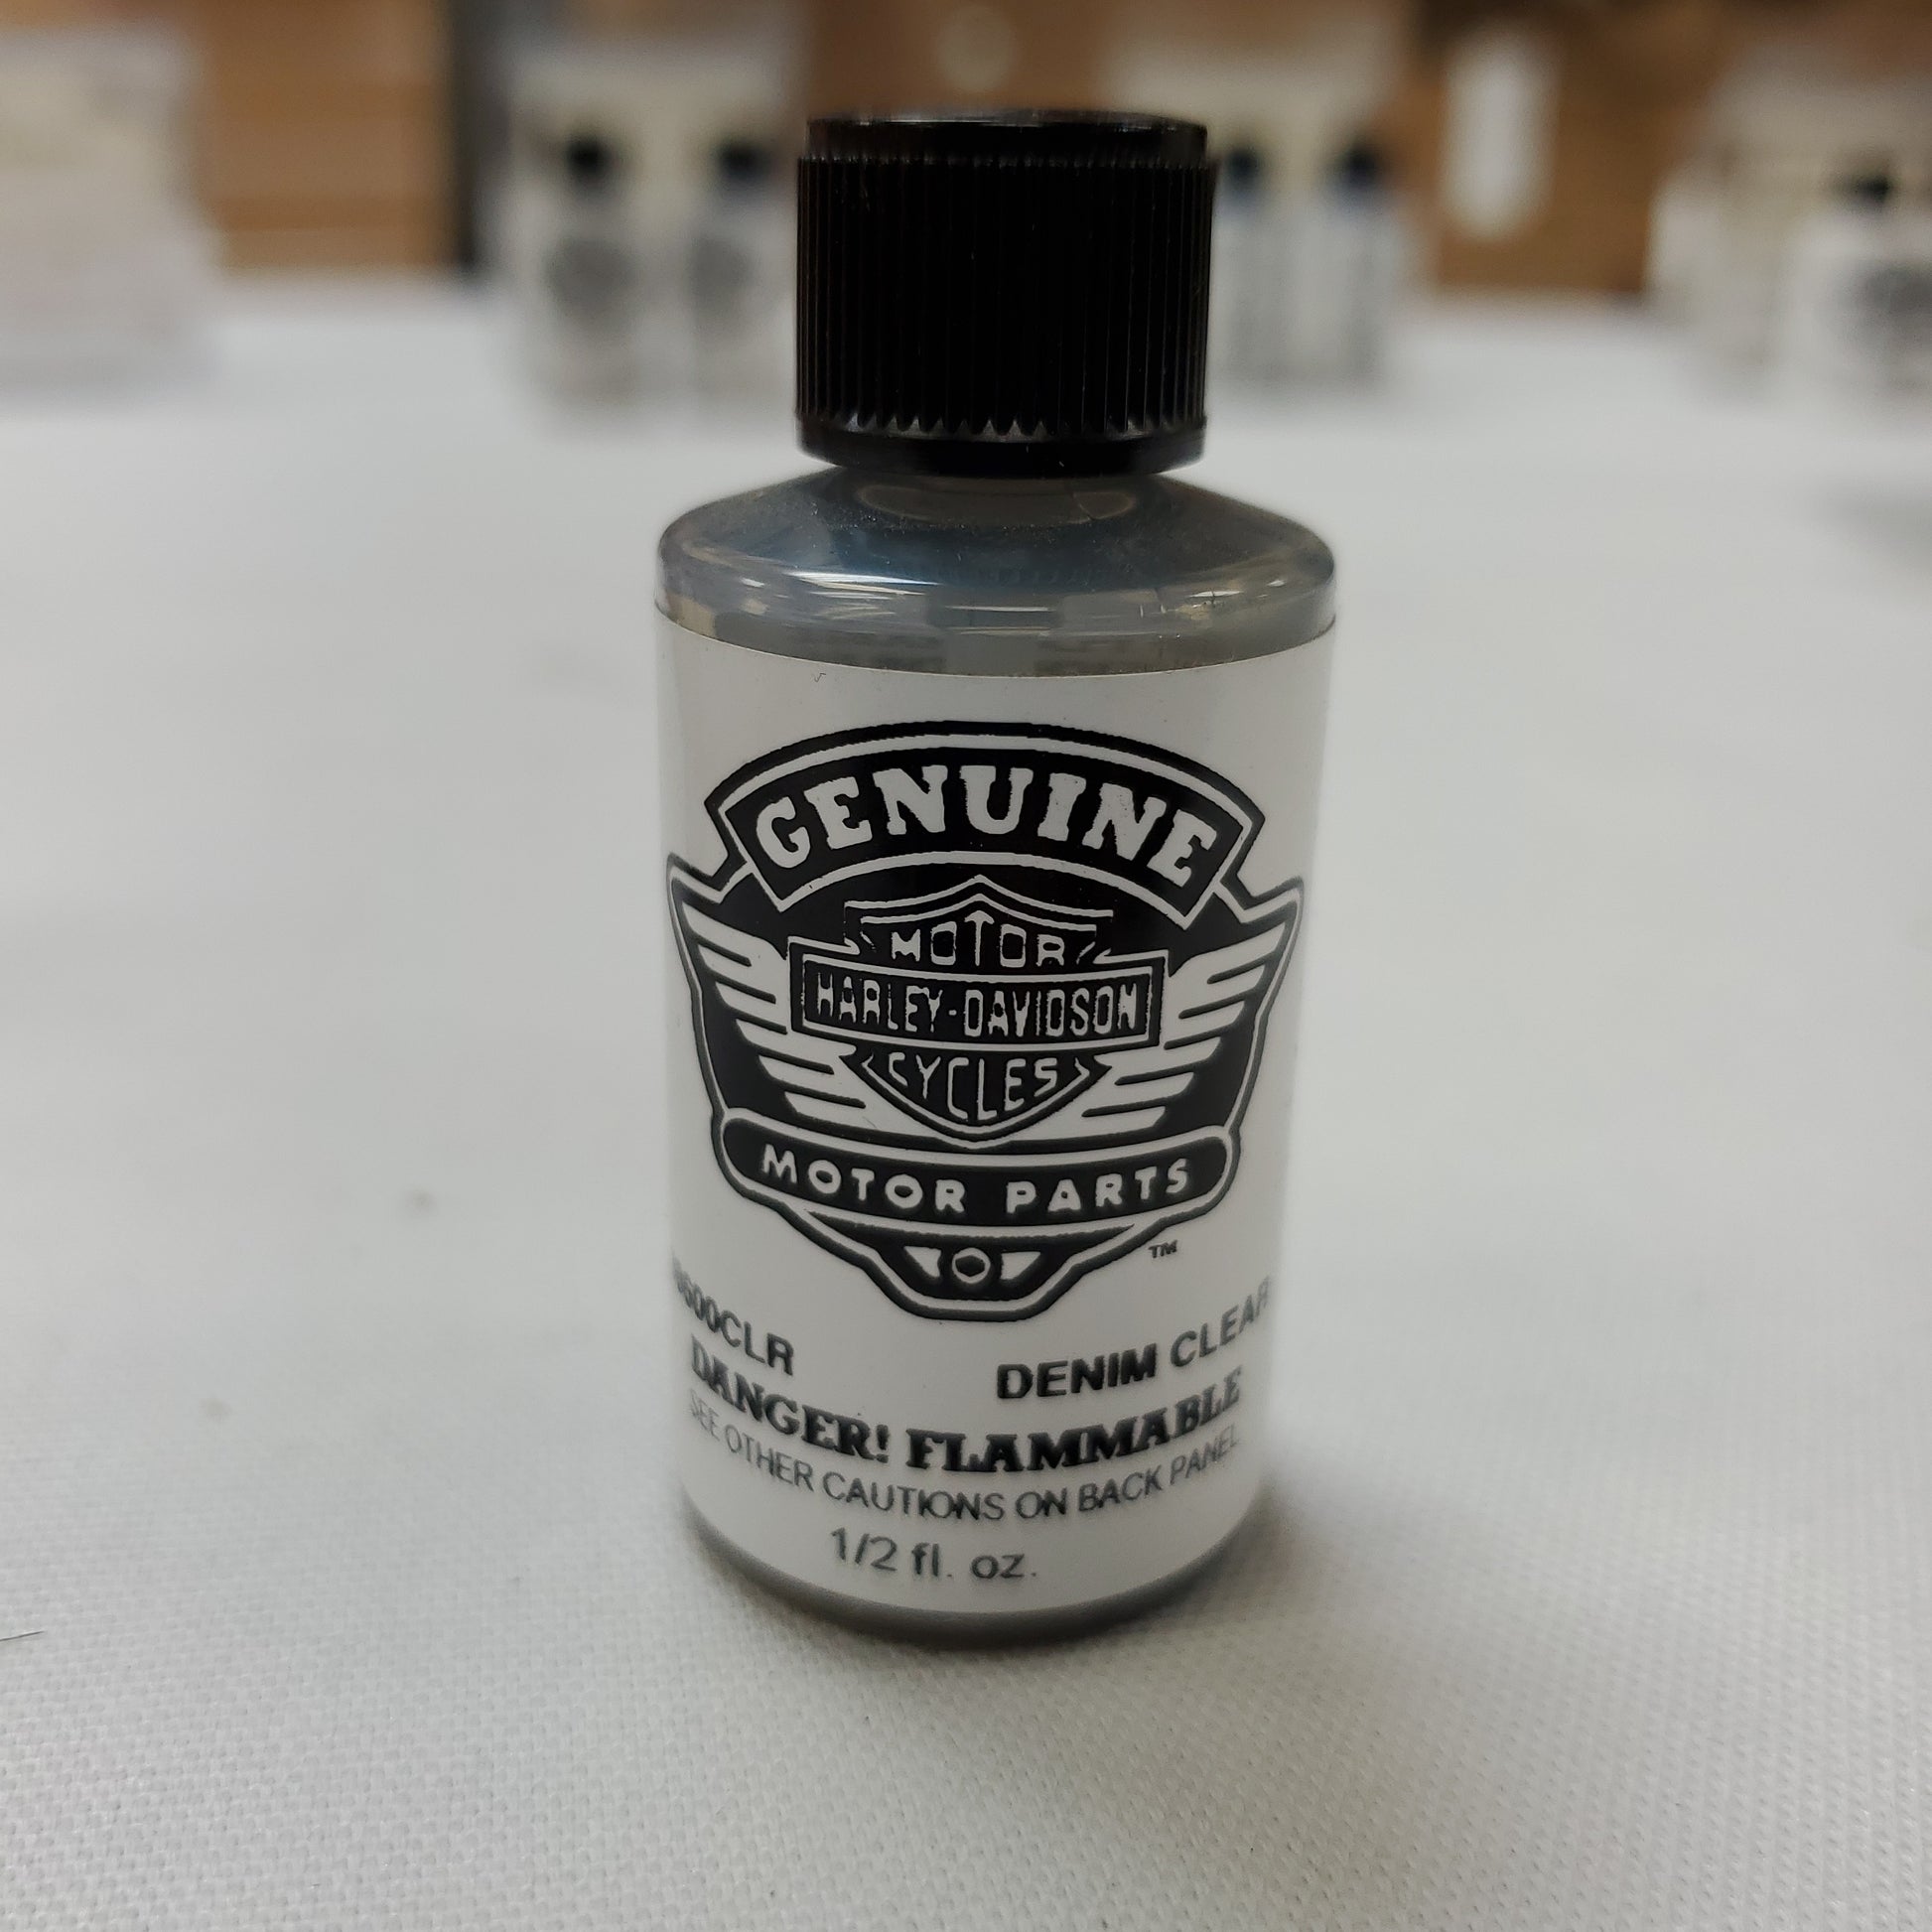 Genuine Harley-Davidson touch up paint kit  Kit Includes Crimson red denim and denim clear top coat  #98601CTZ  Color was used for 2008 model year motorcycles